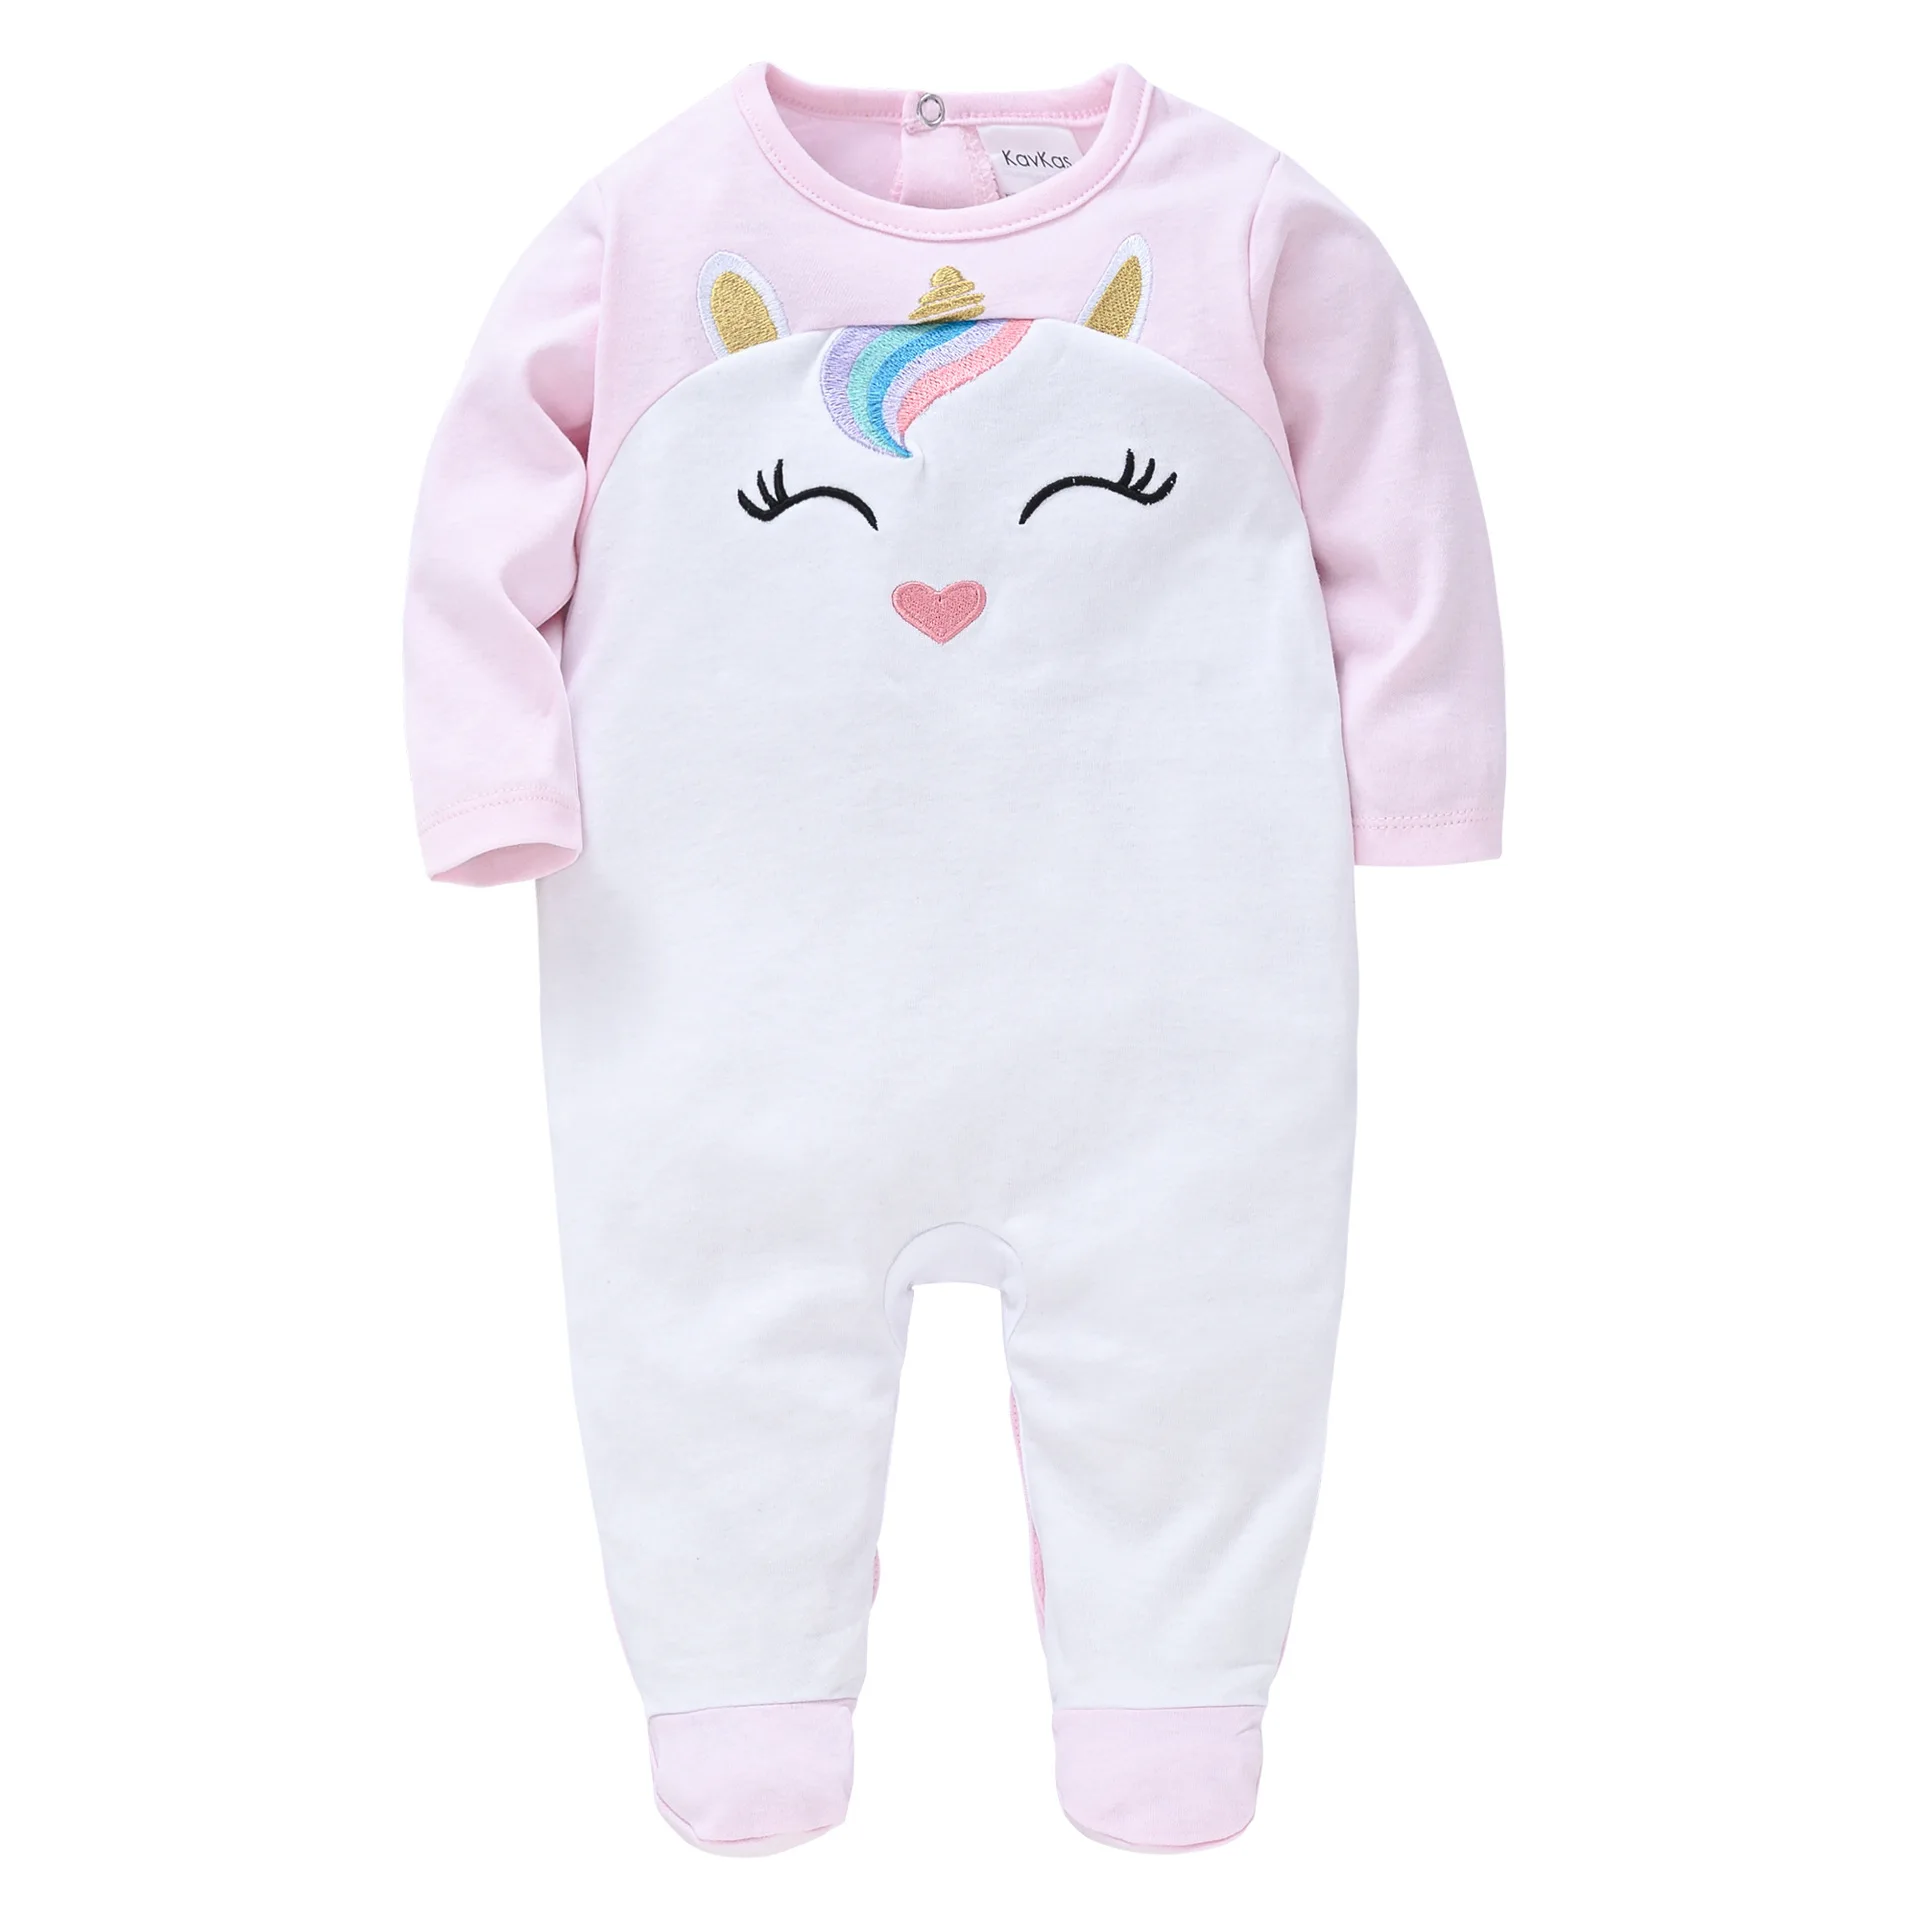 

JiAmy Pink Unocorn 0-12M Infannts Sleepwear Girls Footed Jumpsuit Baby Rompers